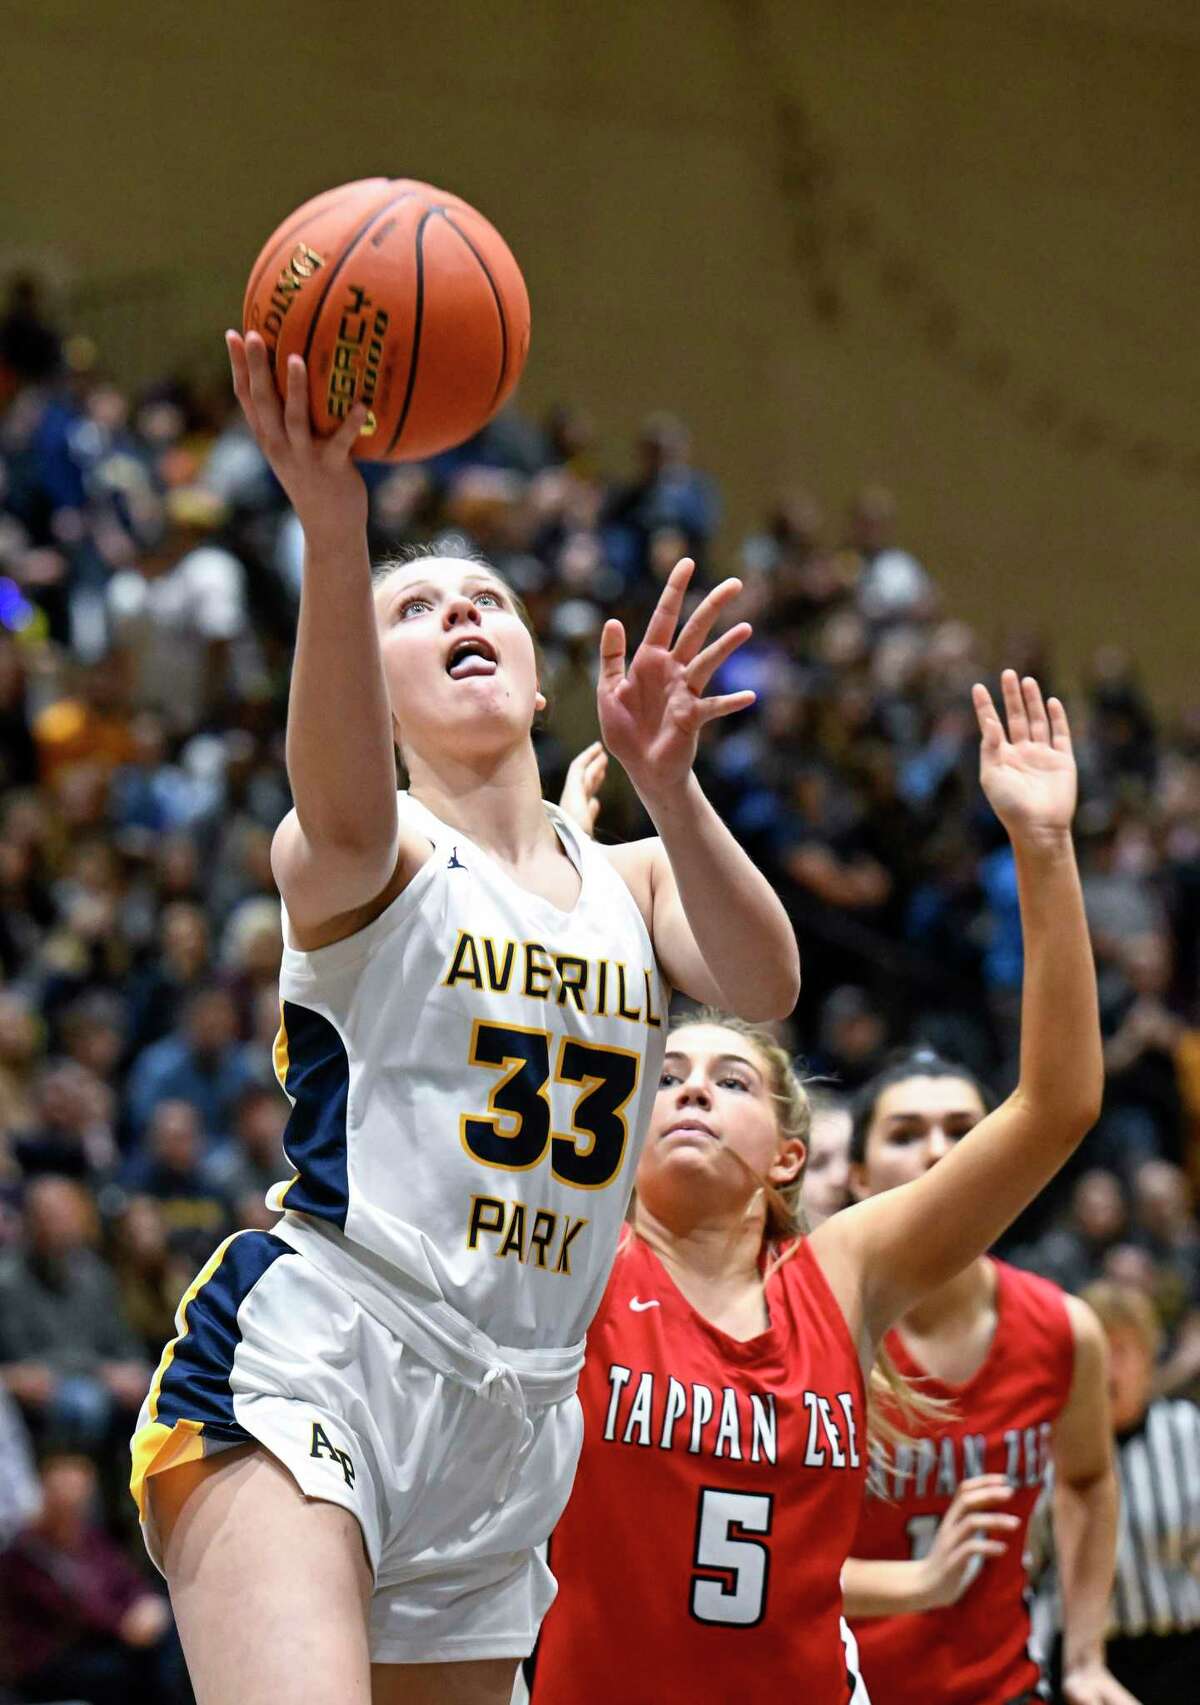 Averill Park's Amelia Wood (33) drives to the basket against Tappan Zee's Kellie Linehan (5) during the New York State Public High School Athletic Association girls' Class A final basketball game on Saturday, March 19, 2022, in Troy, N.Y.